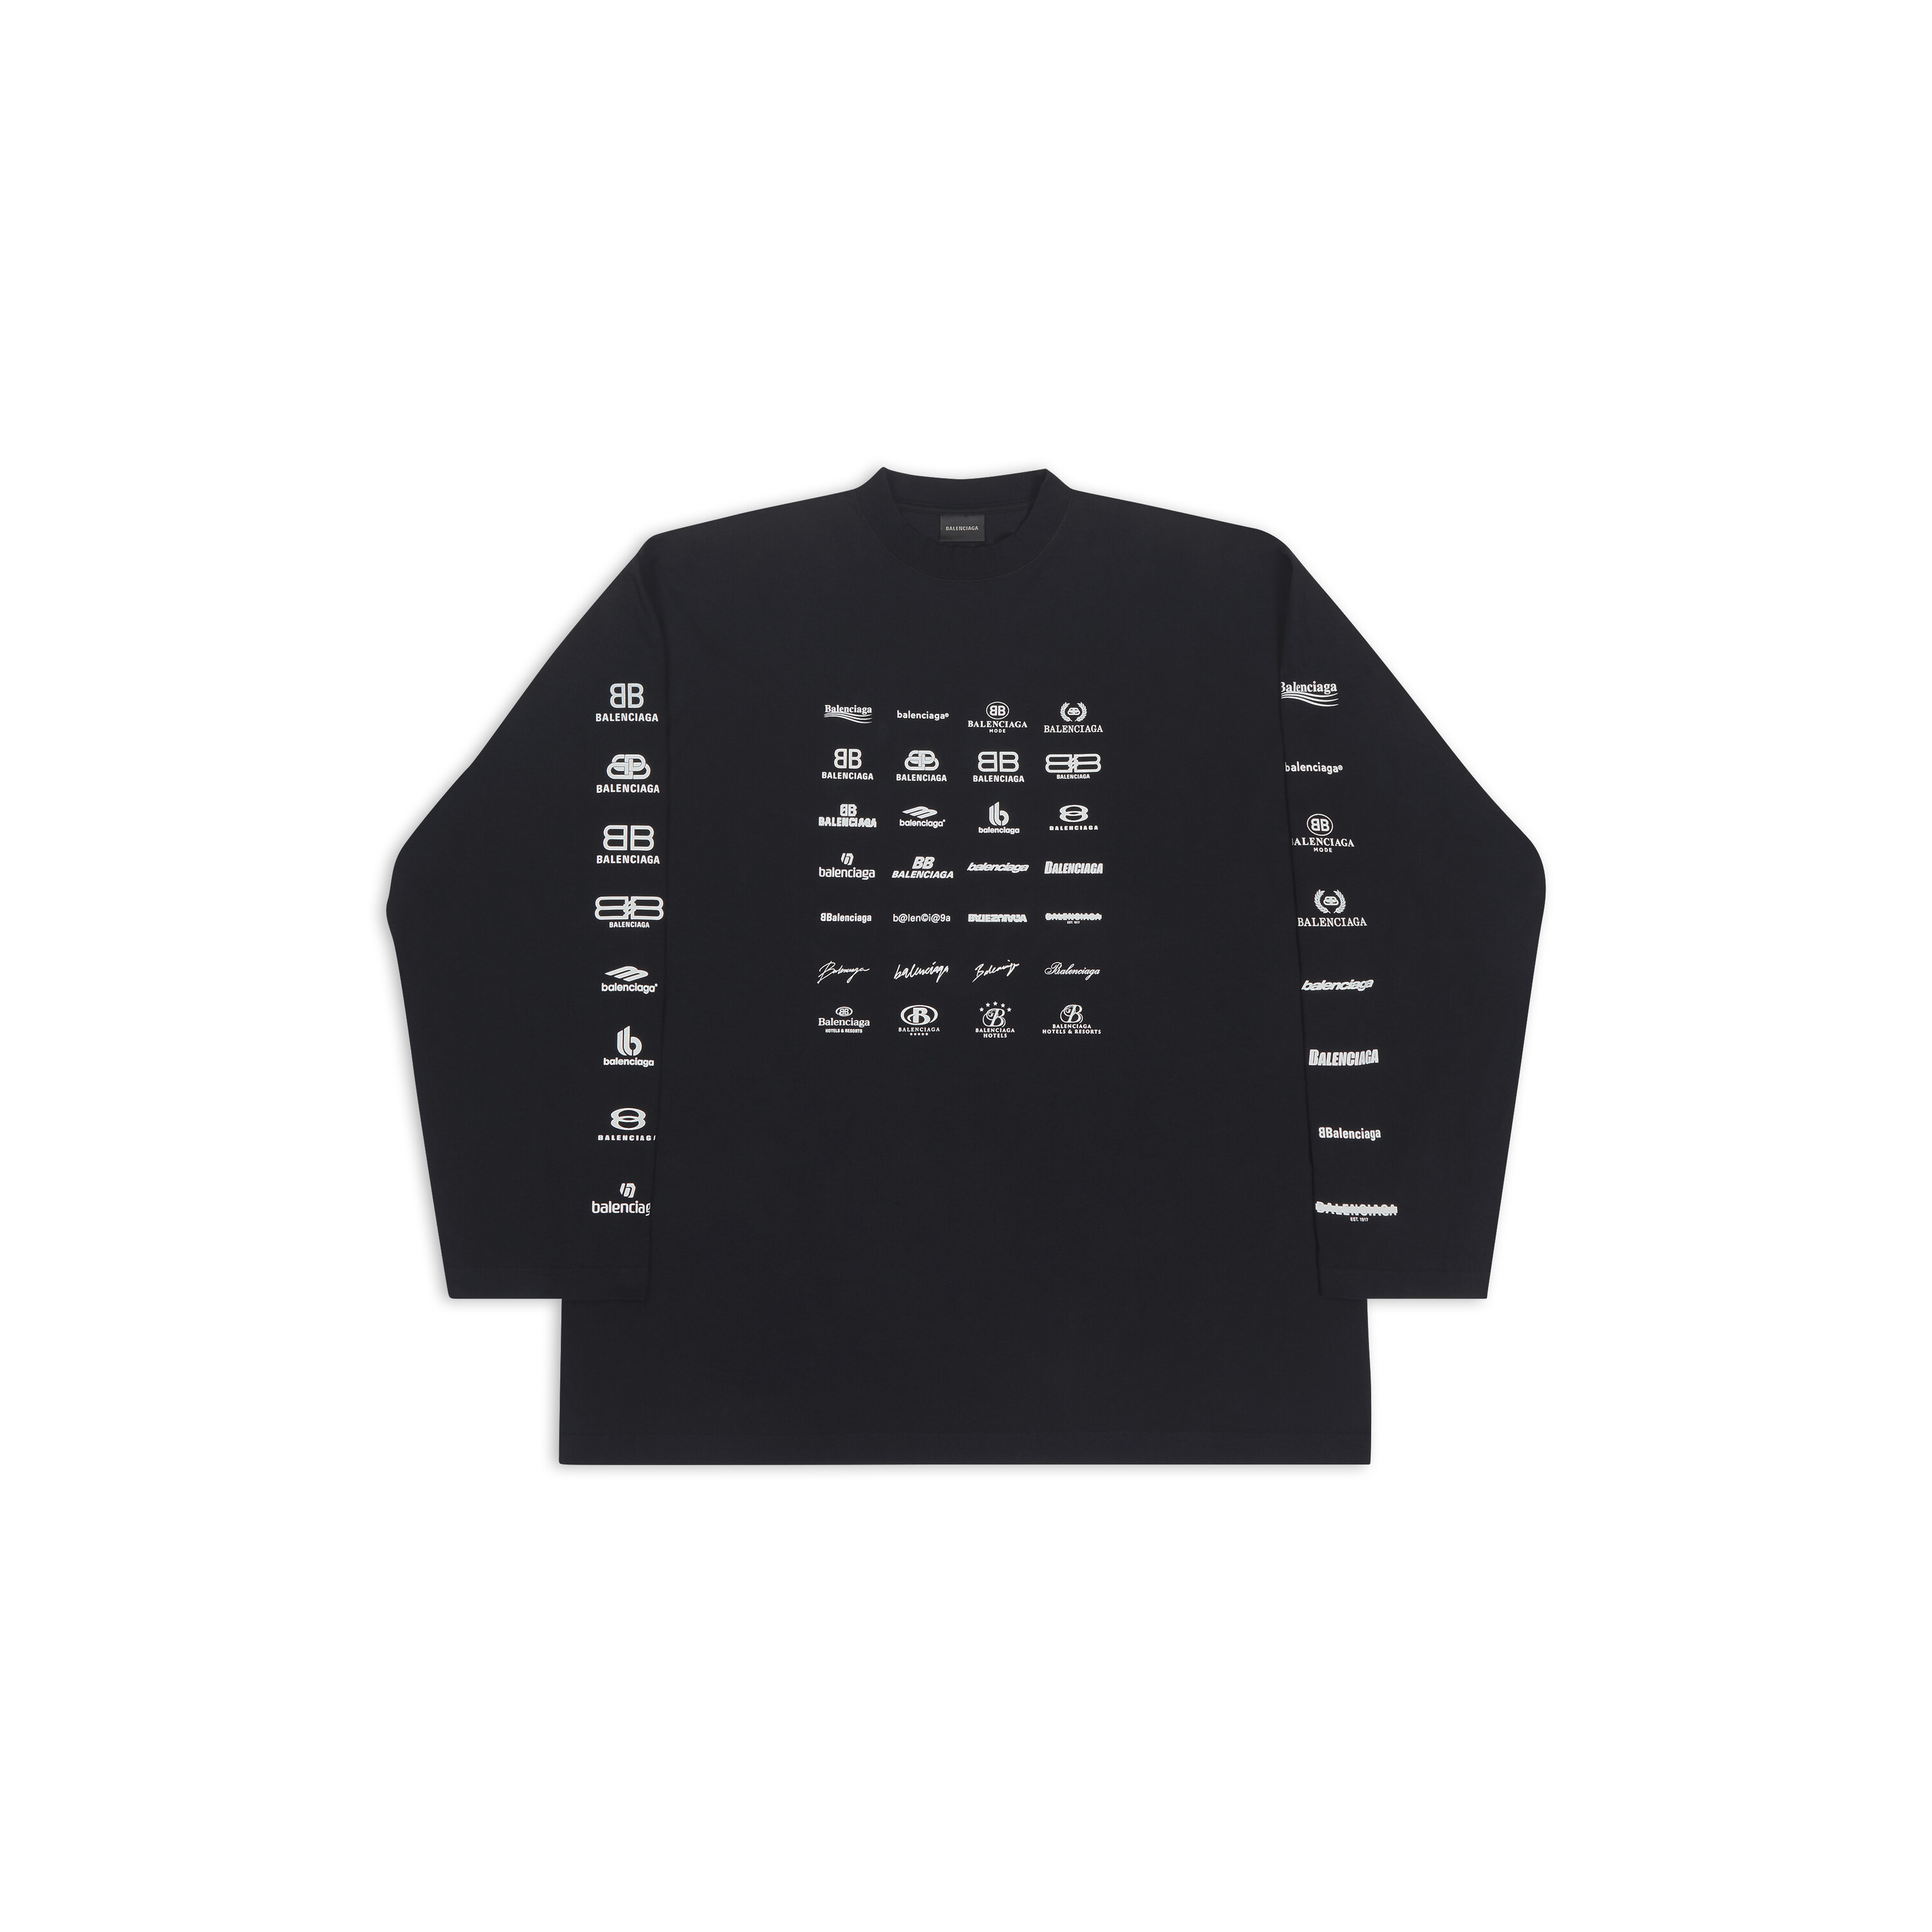 Long-sleeved t-shirt with Archive logo